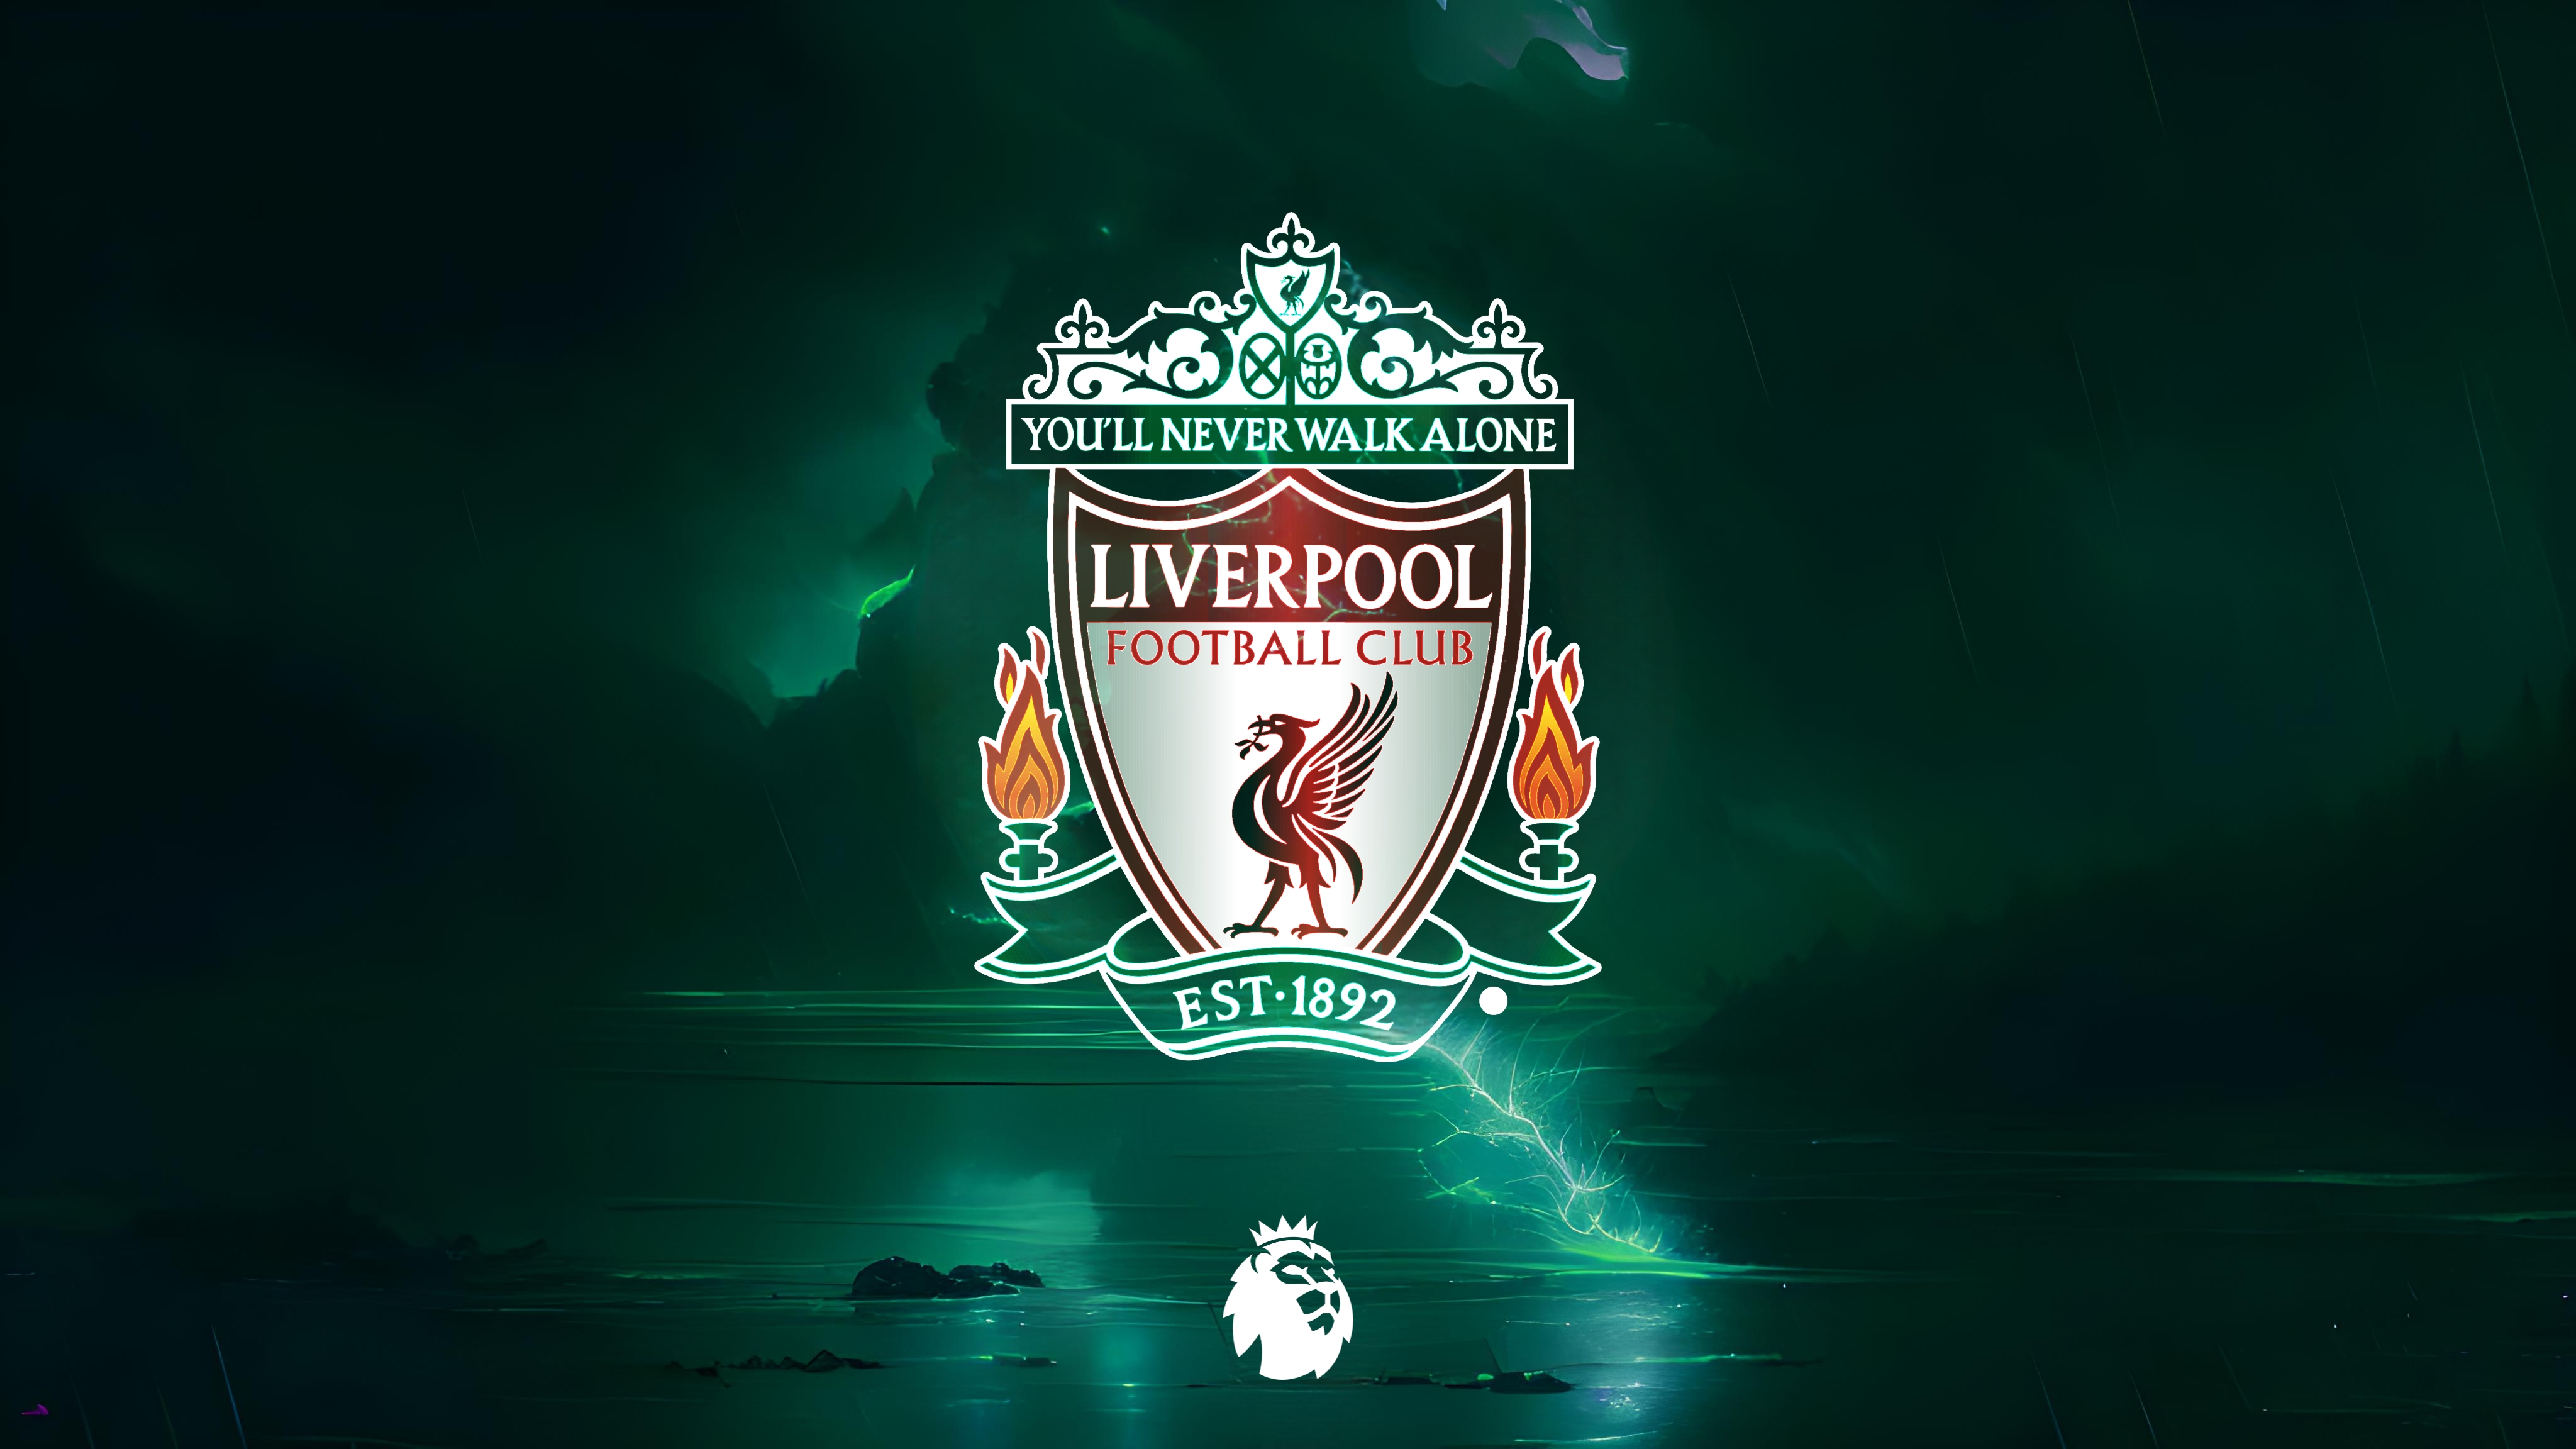 Raging-storm: Liverpool FC by Z A Y N O S